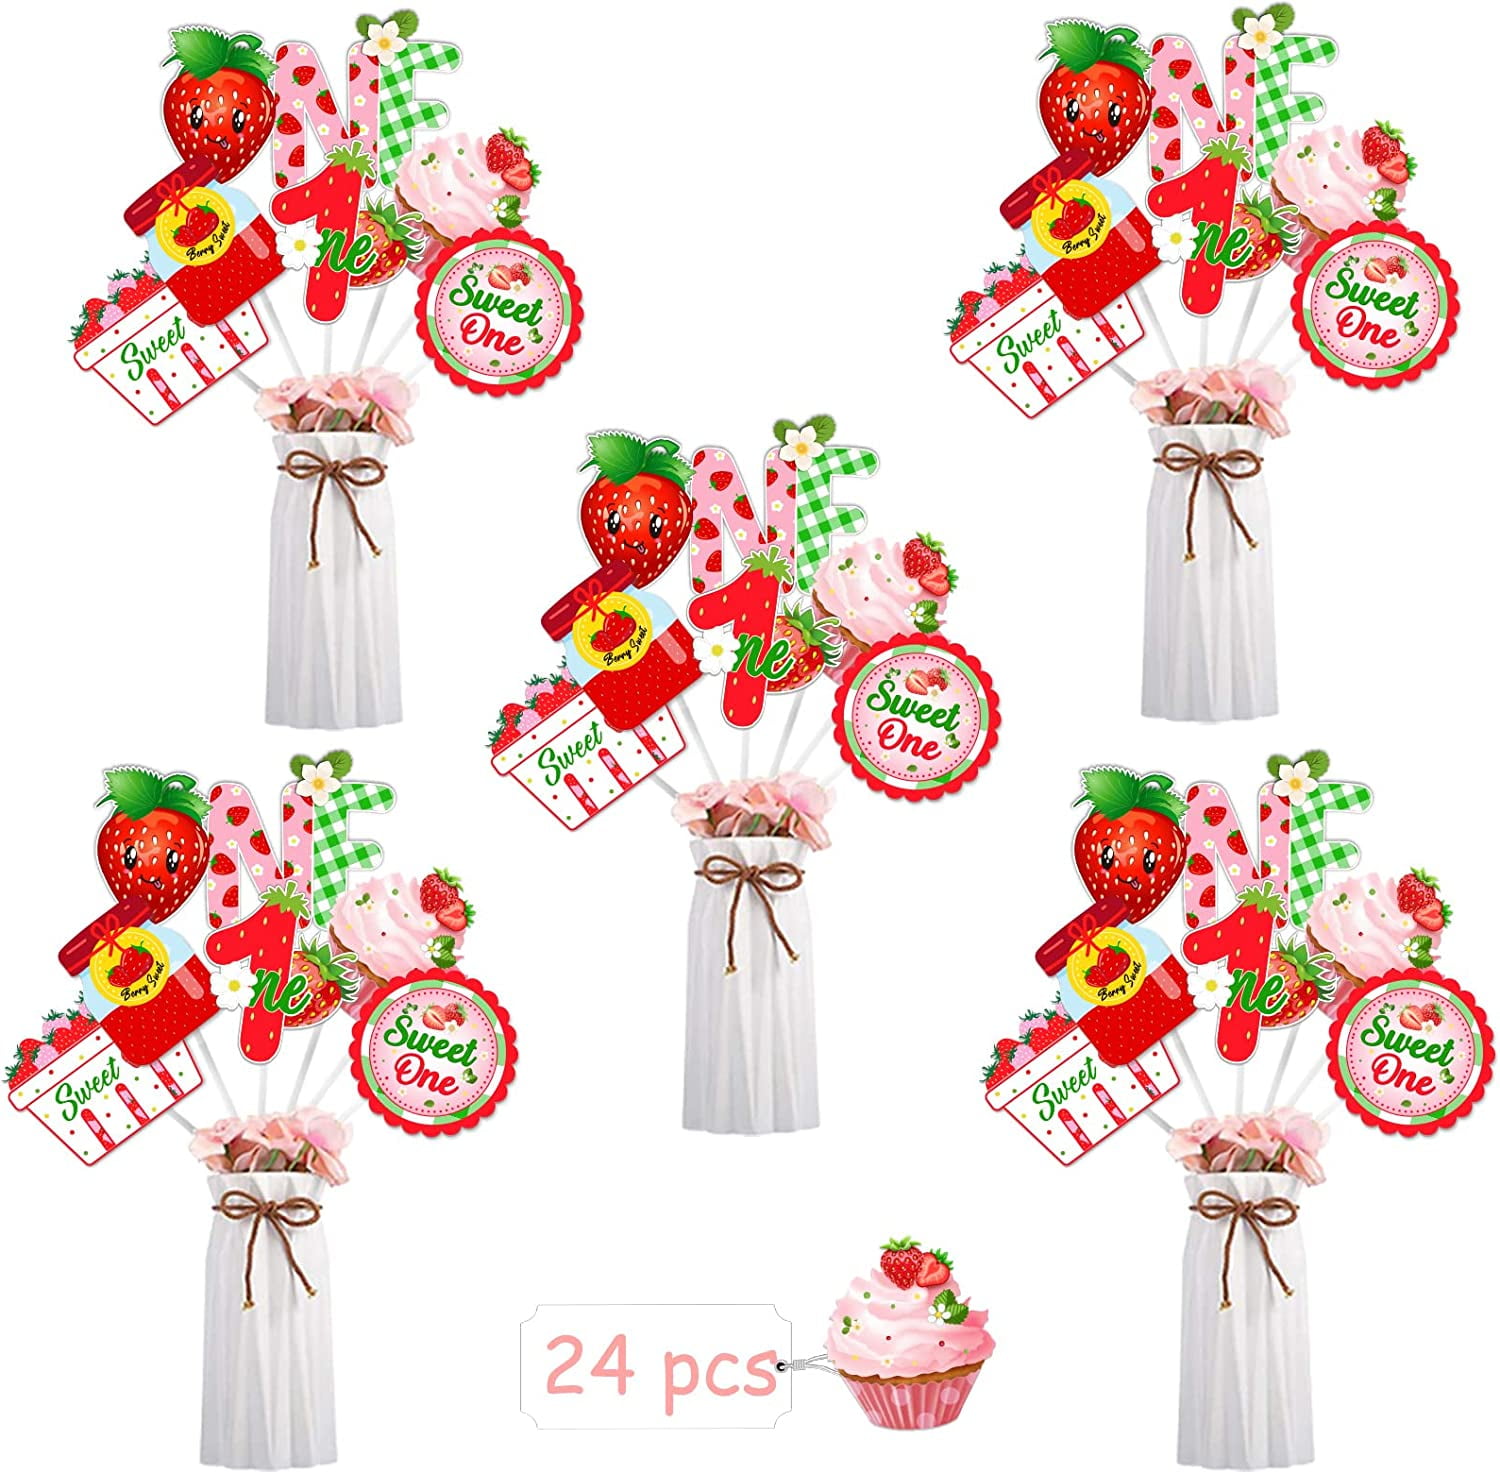  10Pcs Berry First Birthday Decorations Honeycomb Centerpieces  for Baby Girls, Strawberry Theme 1st Birthday Table Centerpiece Party  Supplies, Berry Sweet One Birthday Party Table Topper Decor : Toys & Games